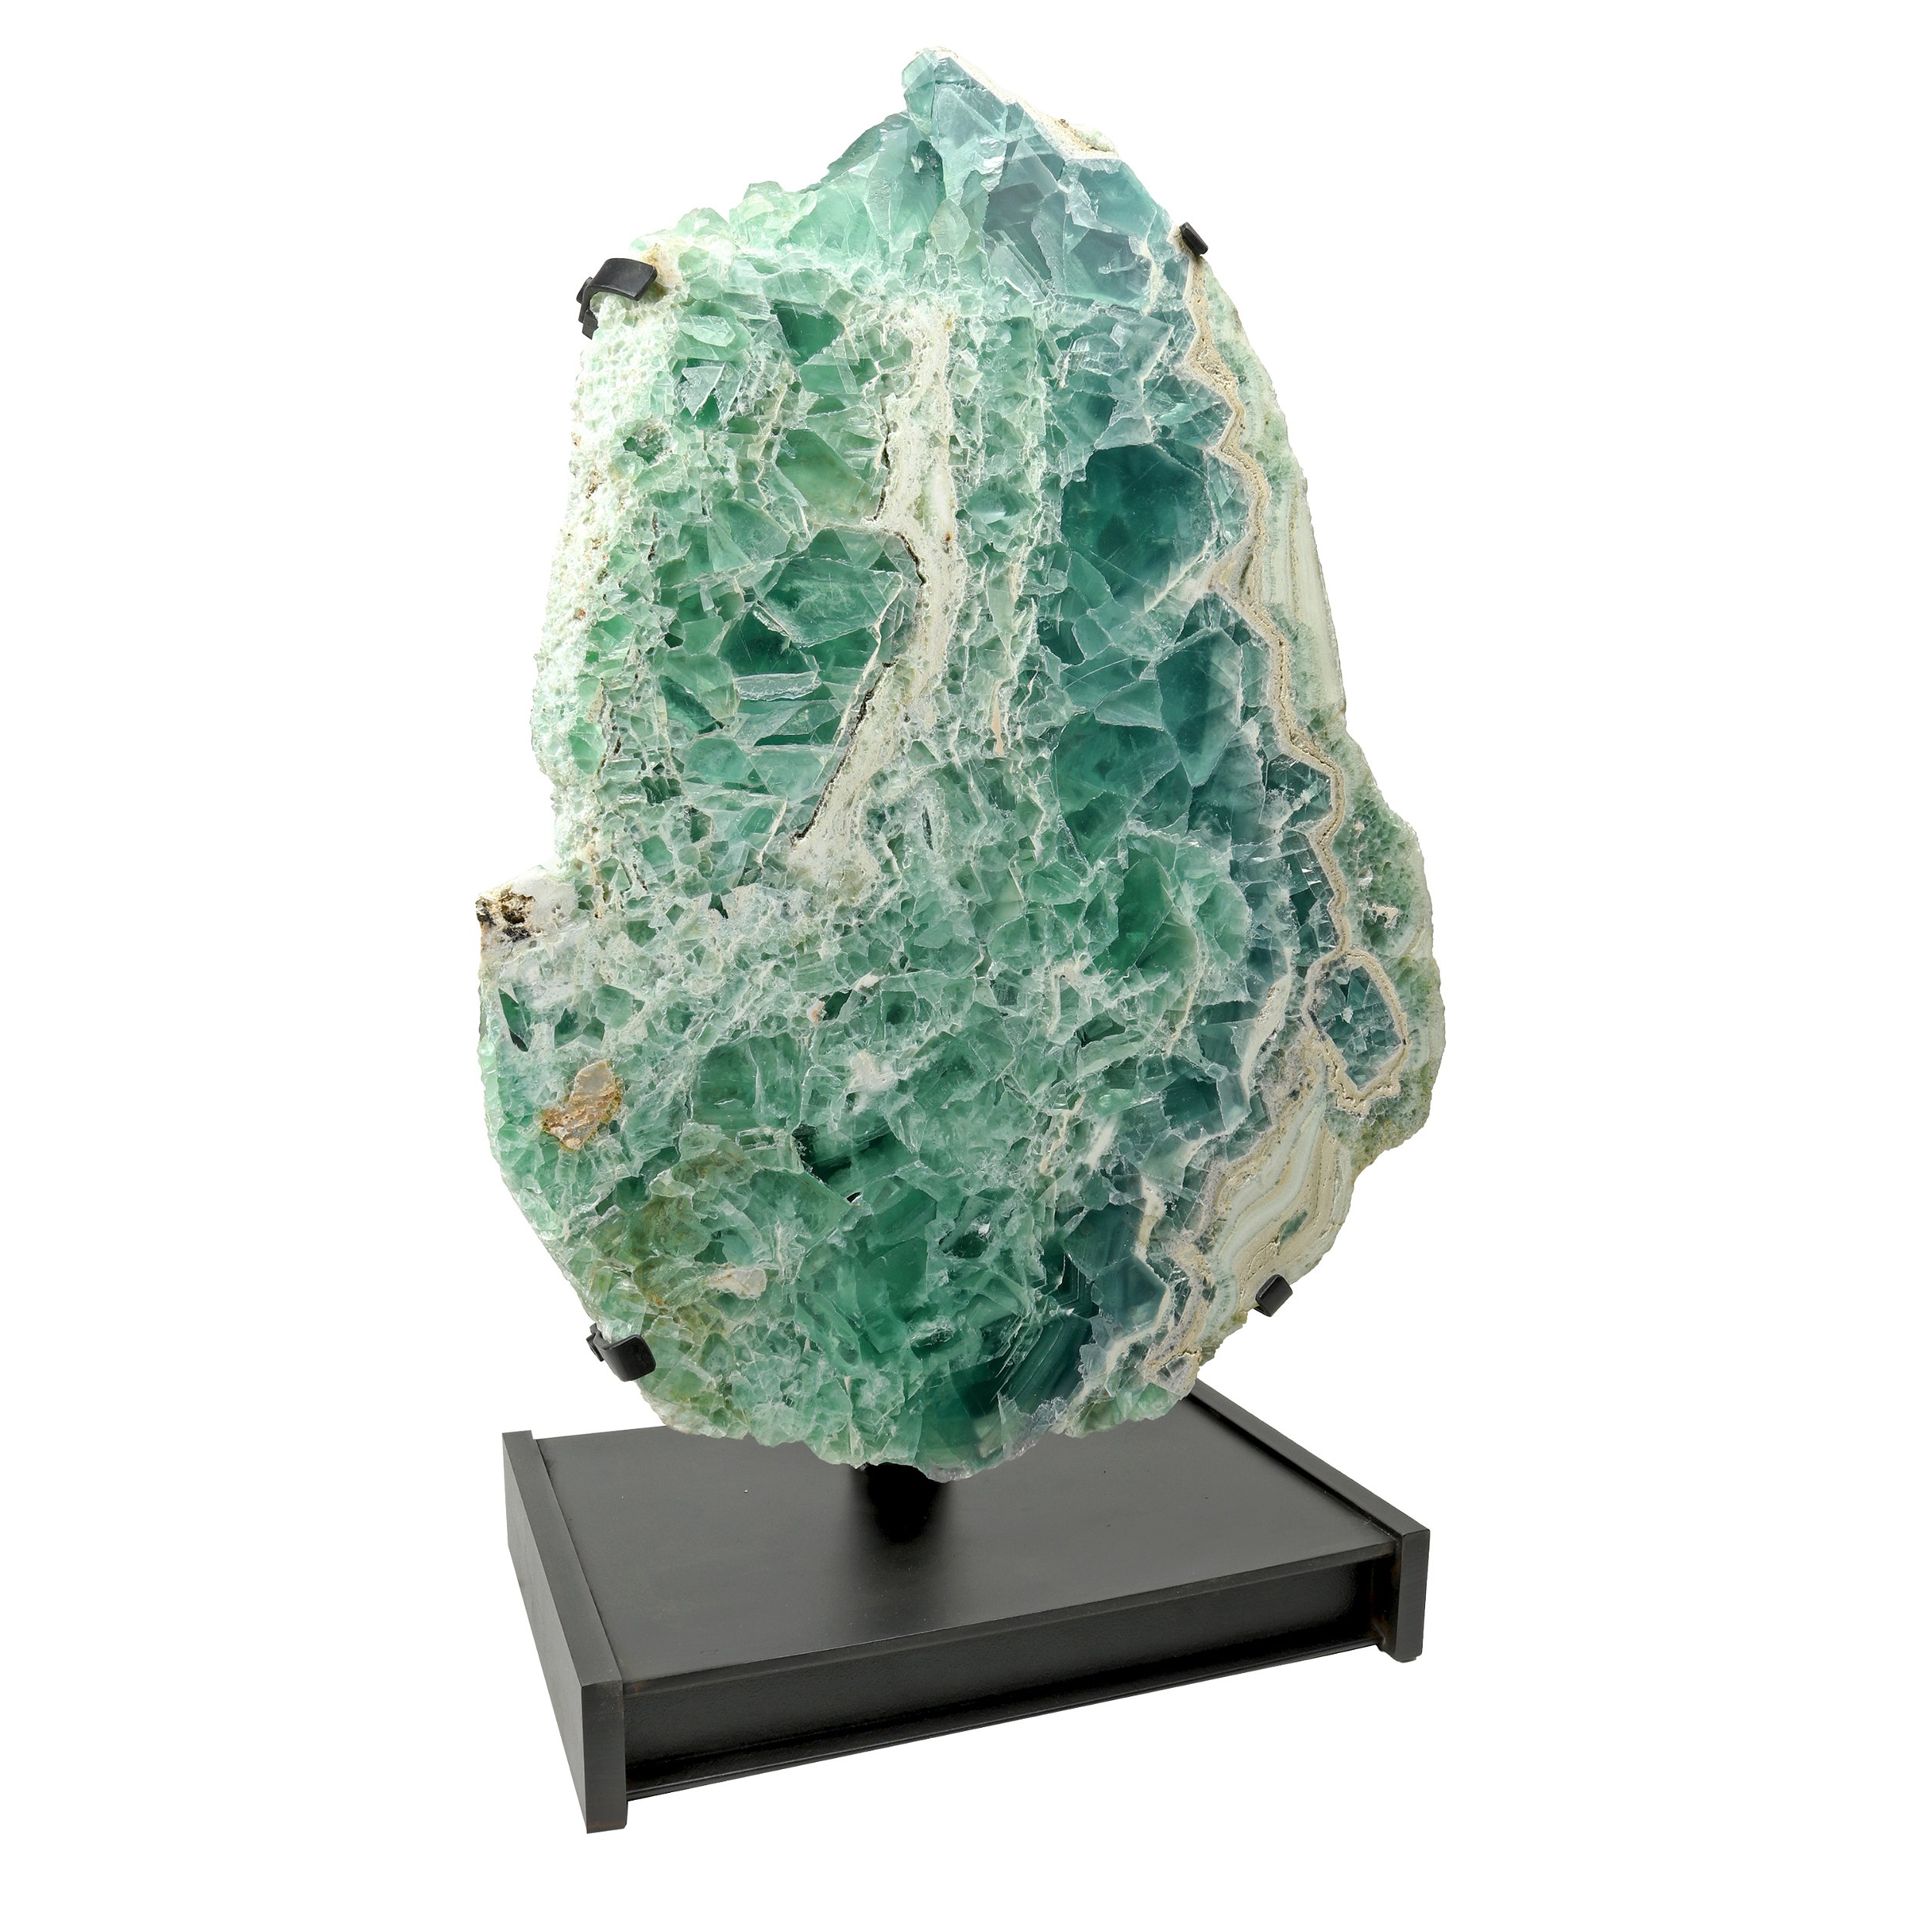 Green Fluorite Slice In Custom Illuminated Stand With Large Crystal Structure